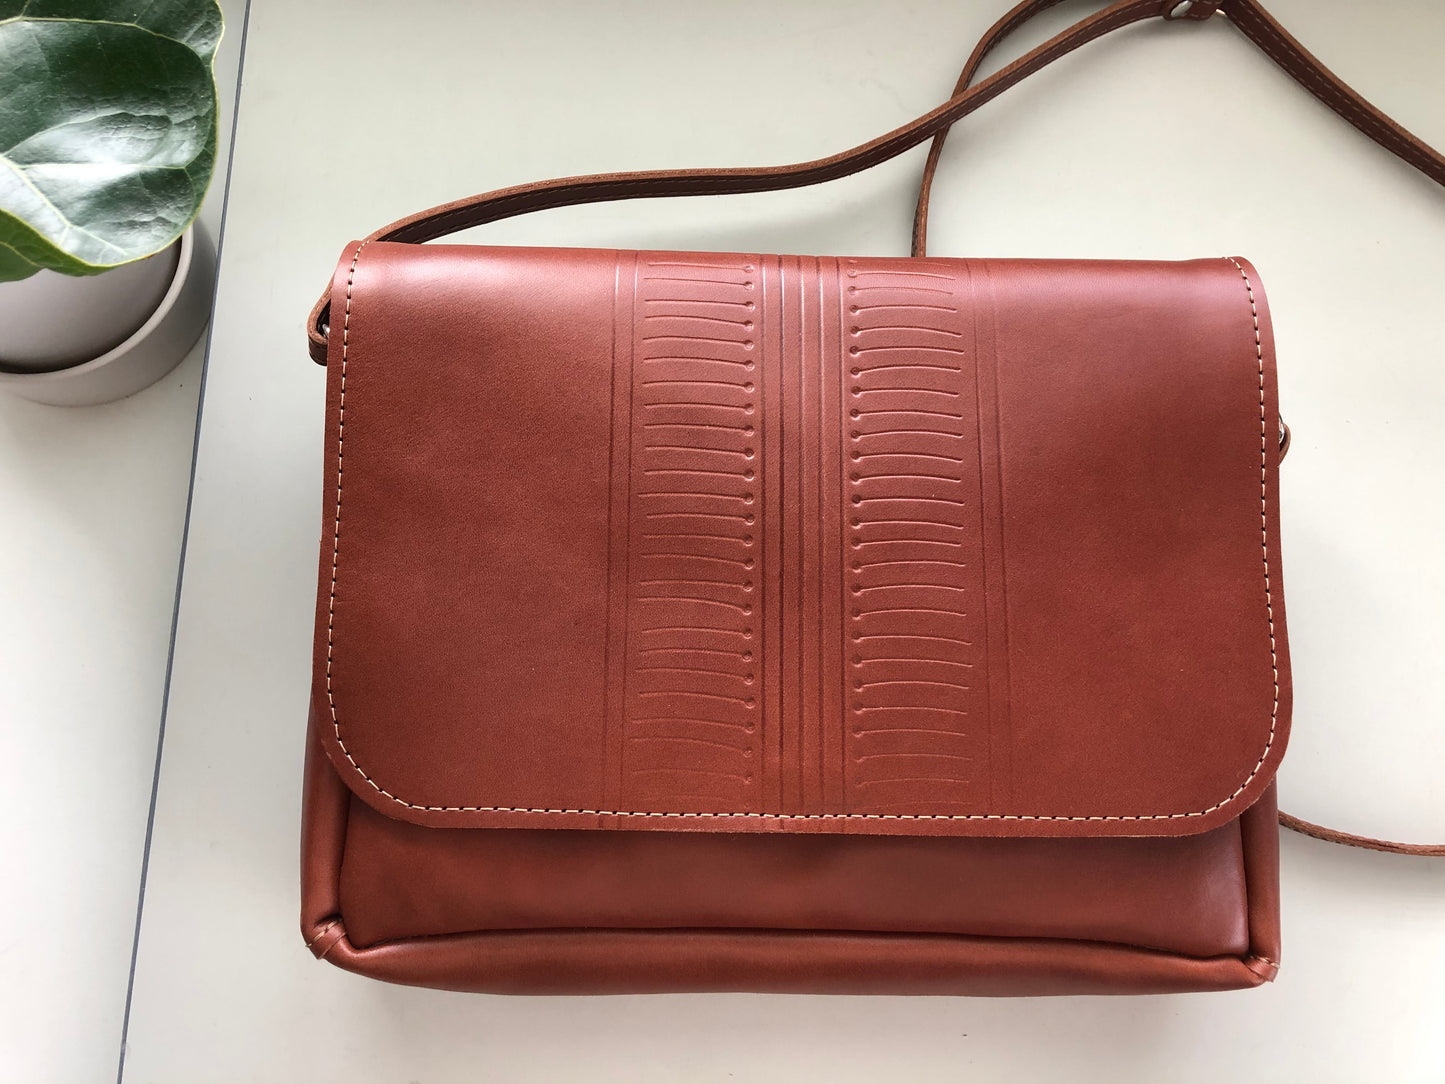 Brown leather crossbody bag lies on white table near plant. 